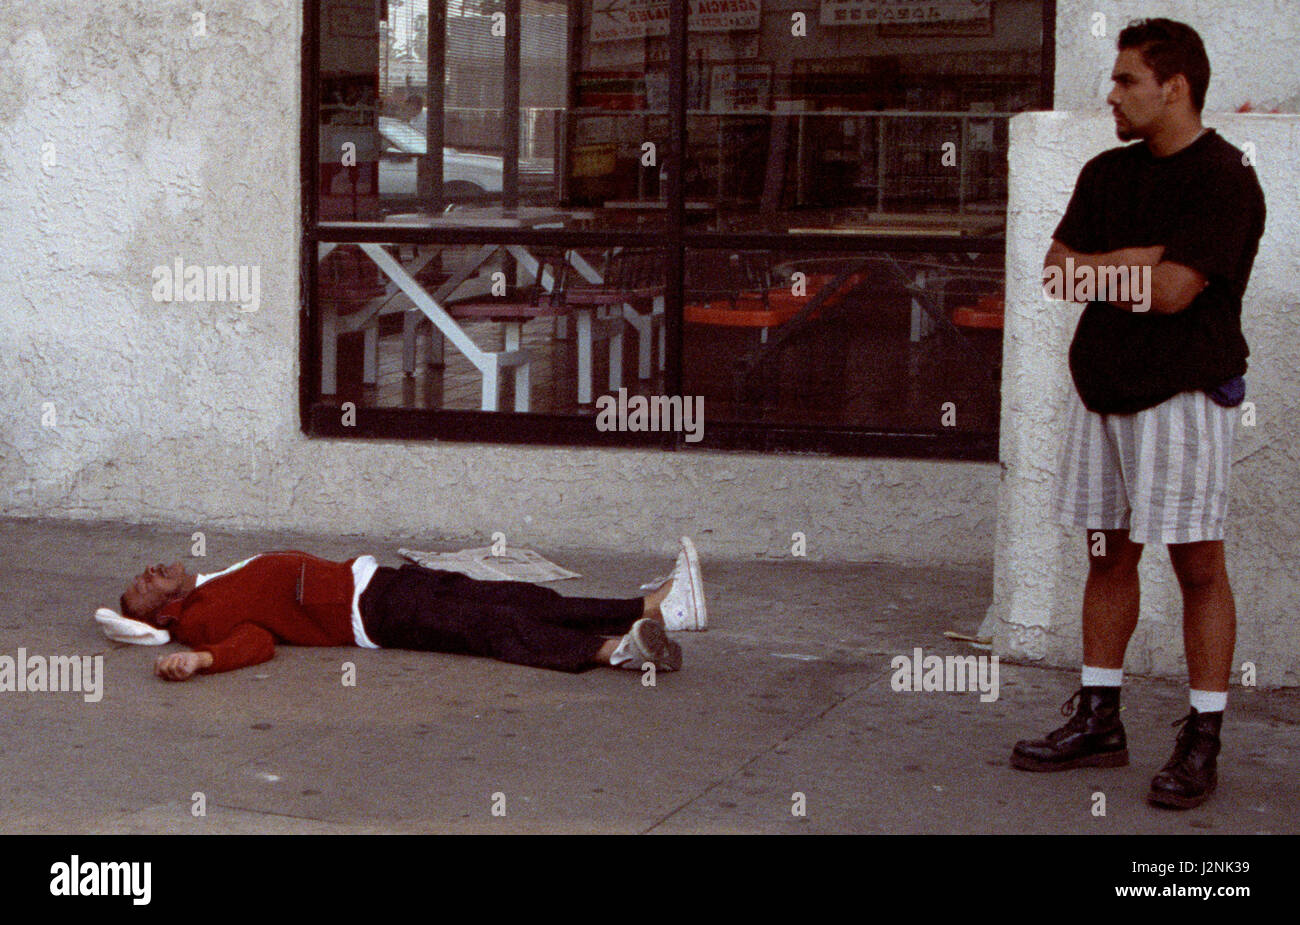 April 29/May 4 1992. Los Angeles CA. Coverage as man lies dead from the Los Angeles riots after the not guilty acquittal of policemen on trial in beating of Rodney King. In total, 55 people were killed during the riots, more than 2,000 people were injured, and more than 11,000 were arrested and $1 billion in property damage. Photos by Gene Blevins/LA DailyNews/ZumaPress. Credit: Gene Blevins/ZUMA Wire/Alamy Live News Stock Photo